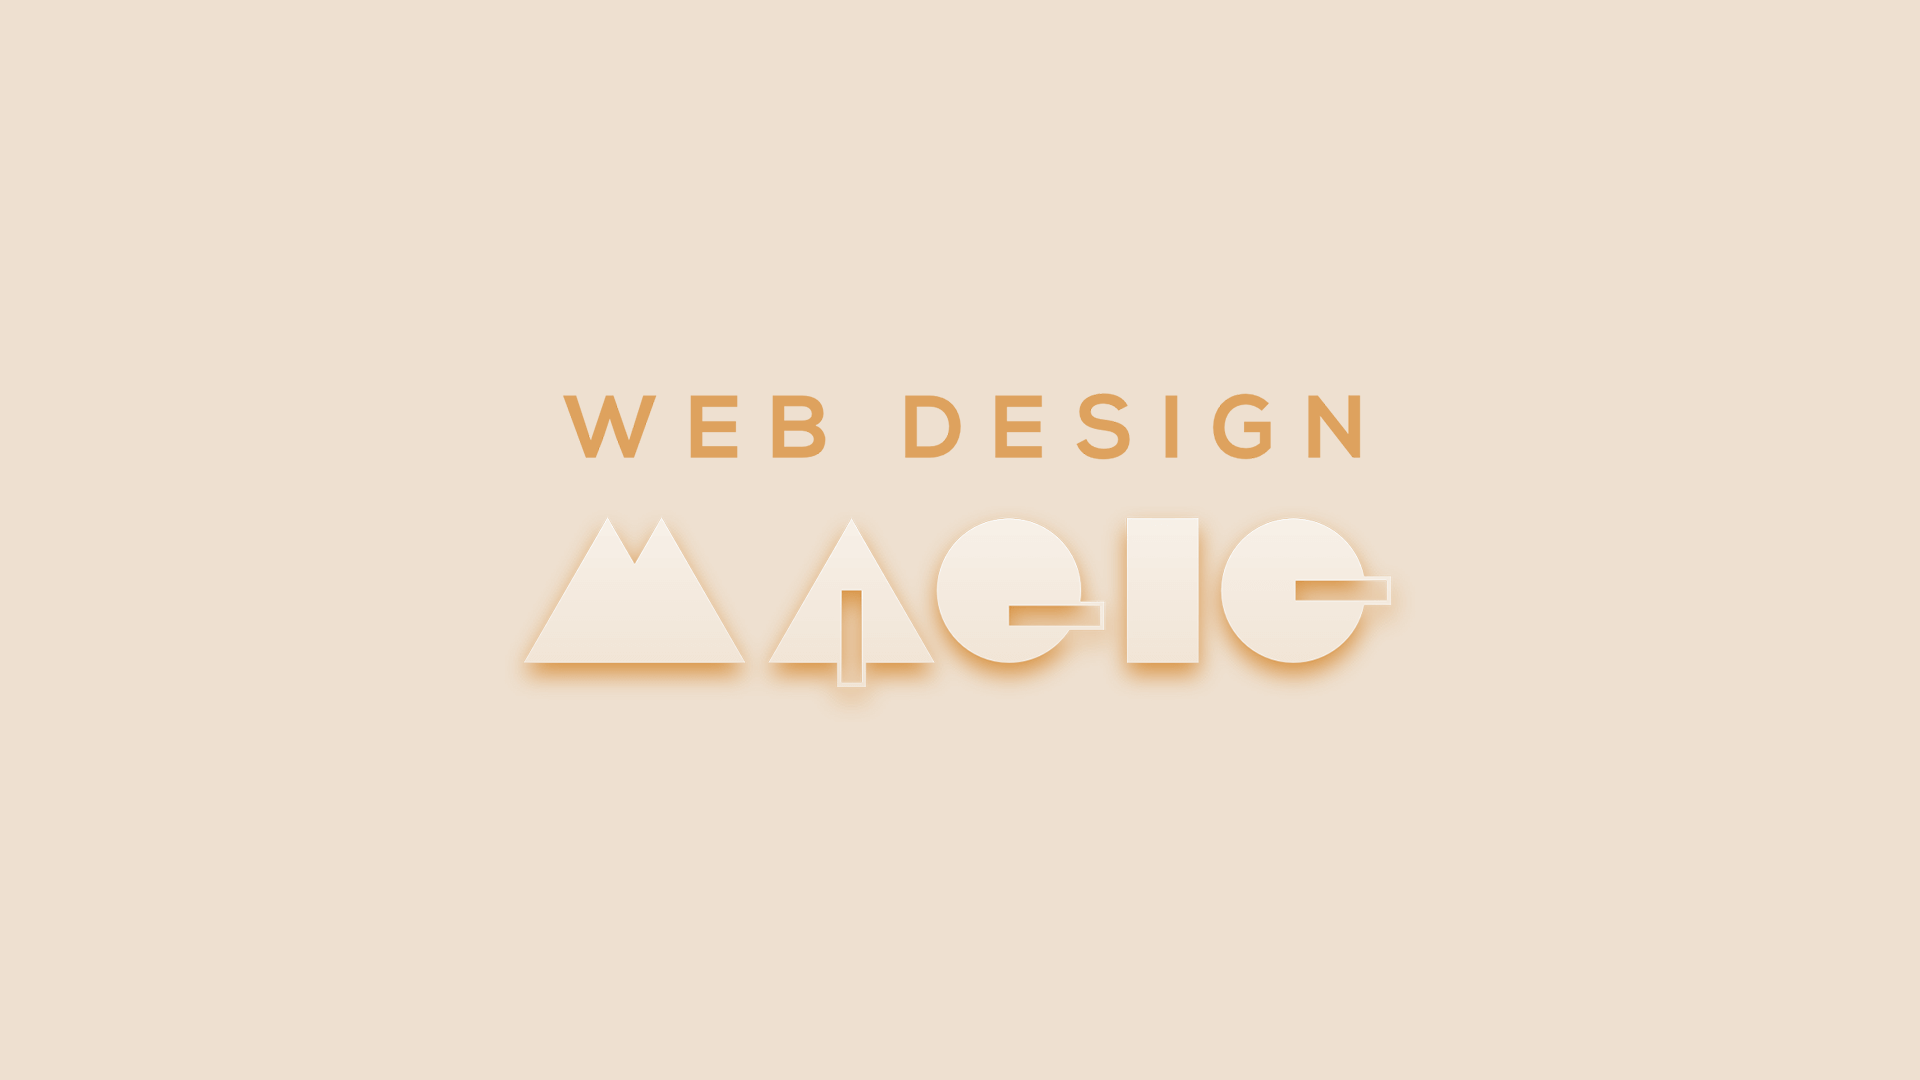 What is magic about graphic design? 